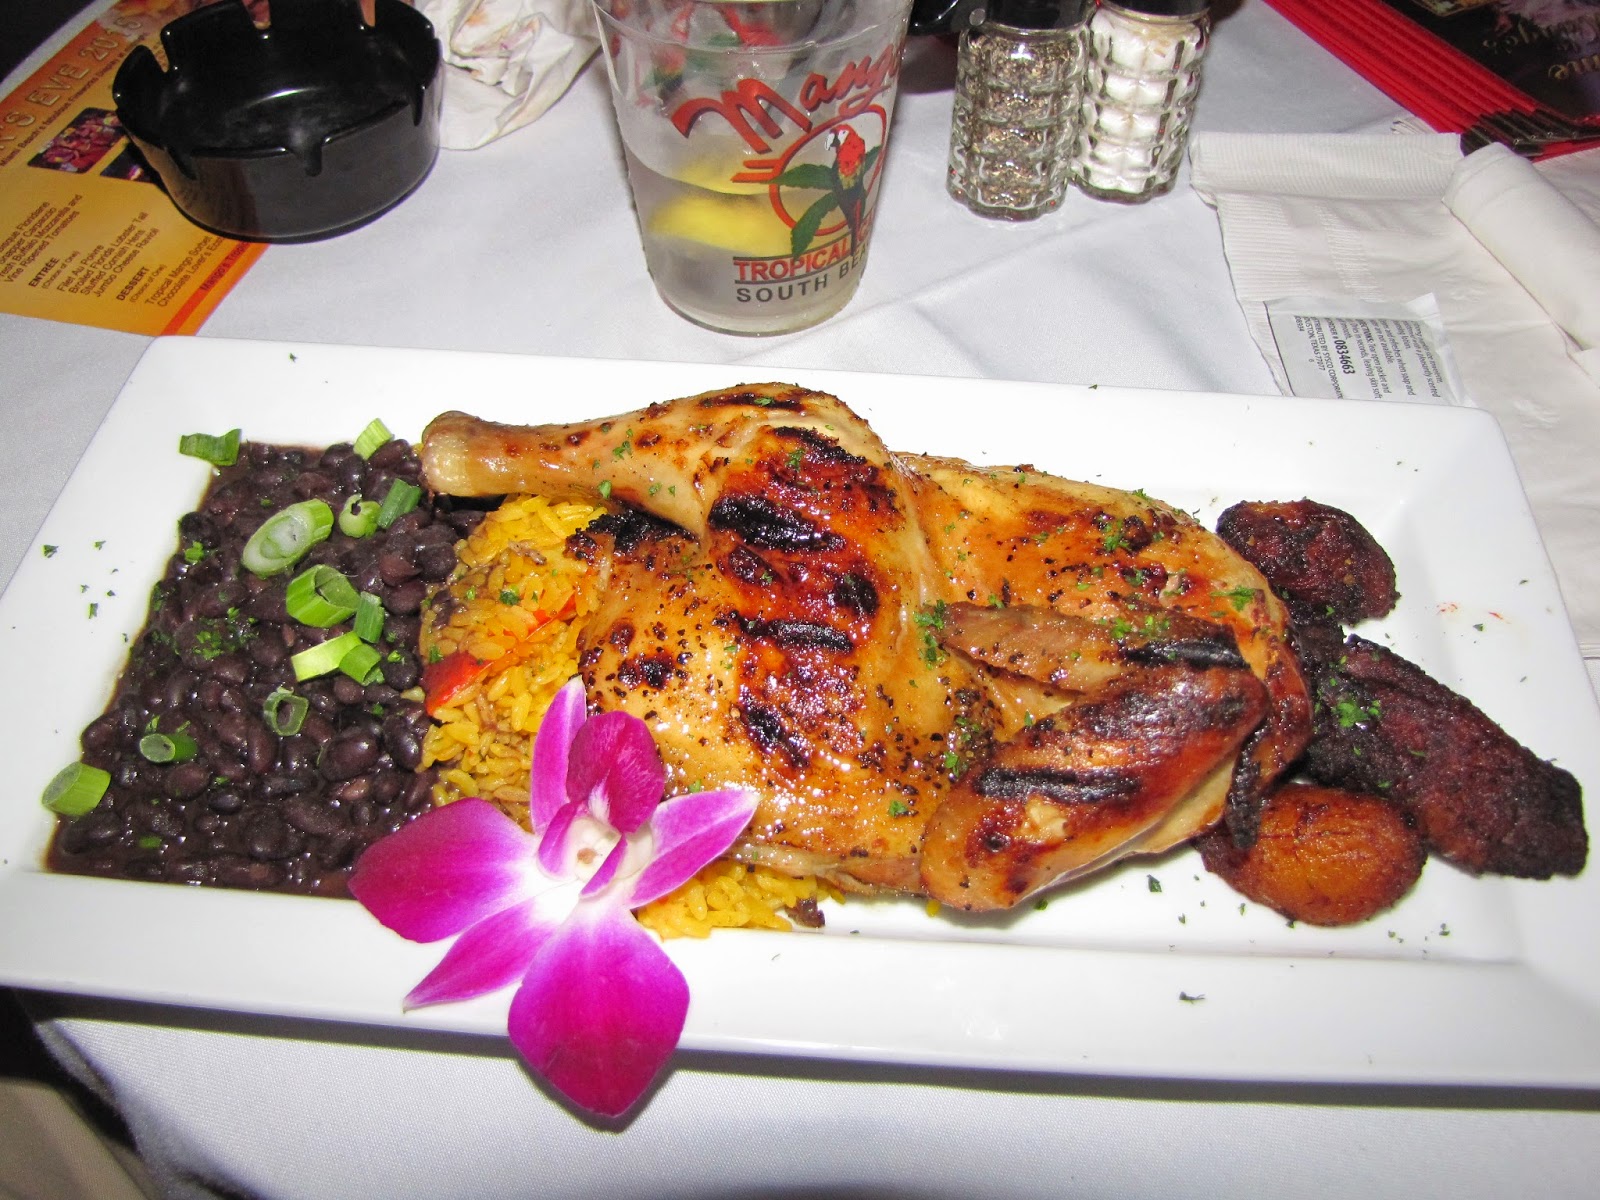 Roasted Margarita Chicken from Mango's Tropical Cafe in Miami, Florida